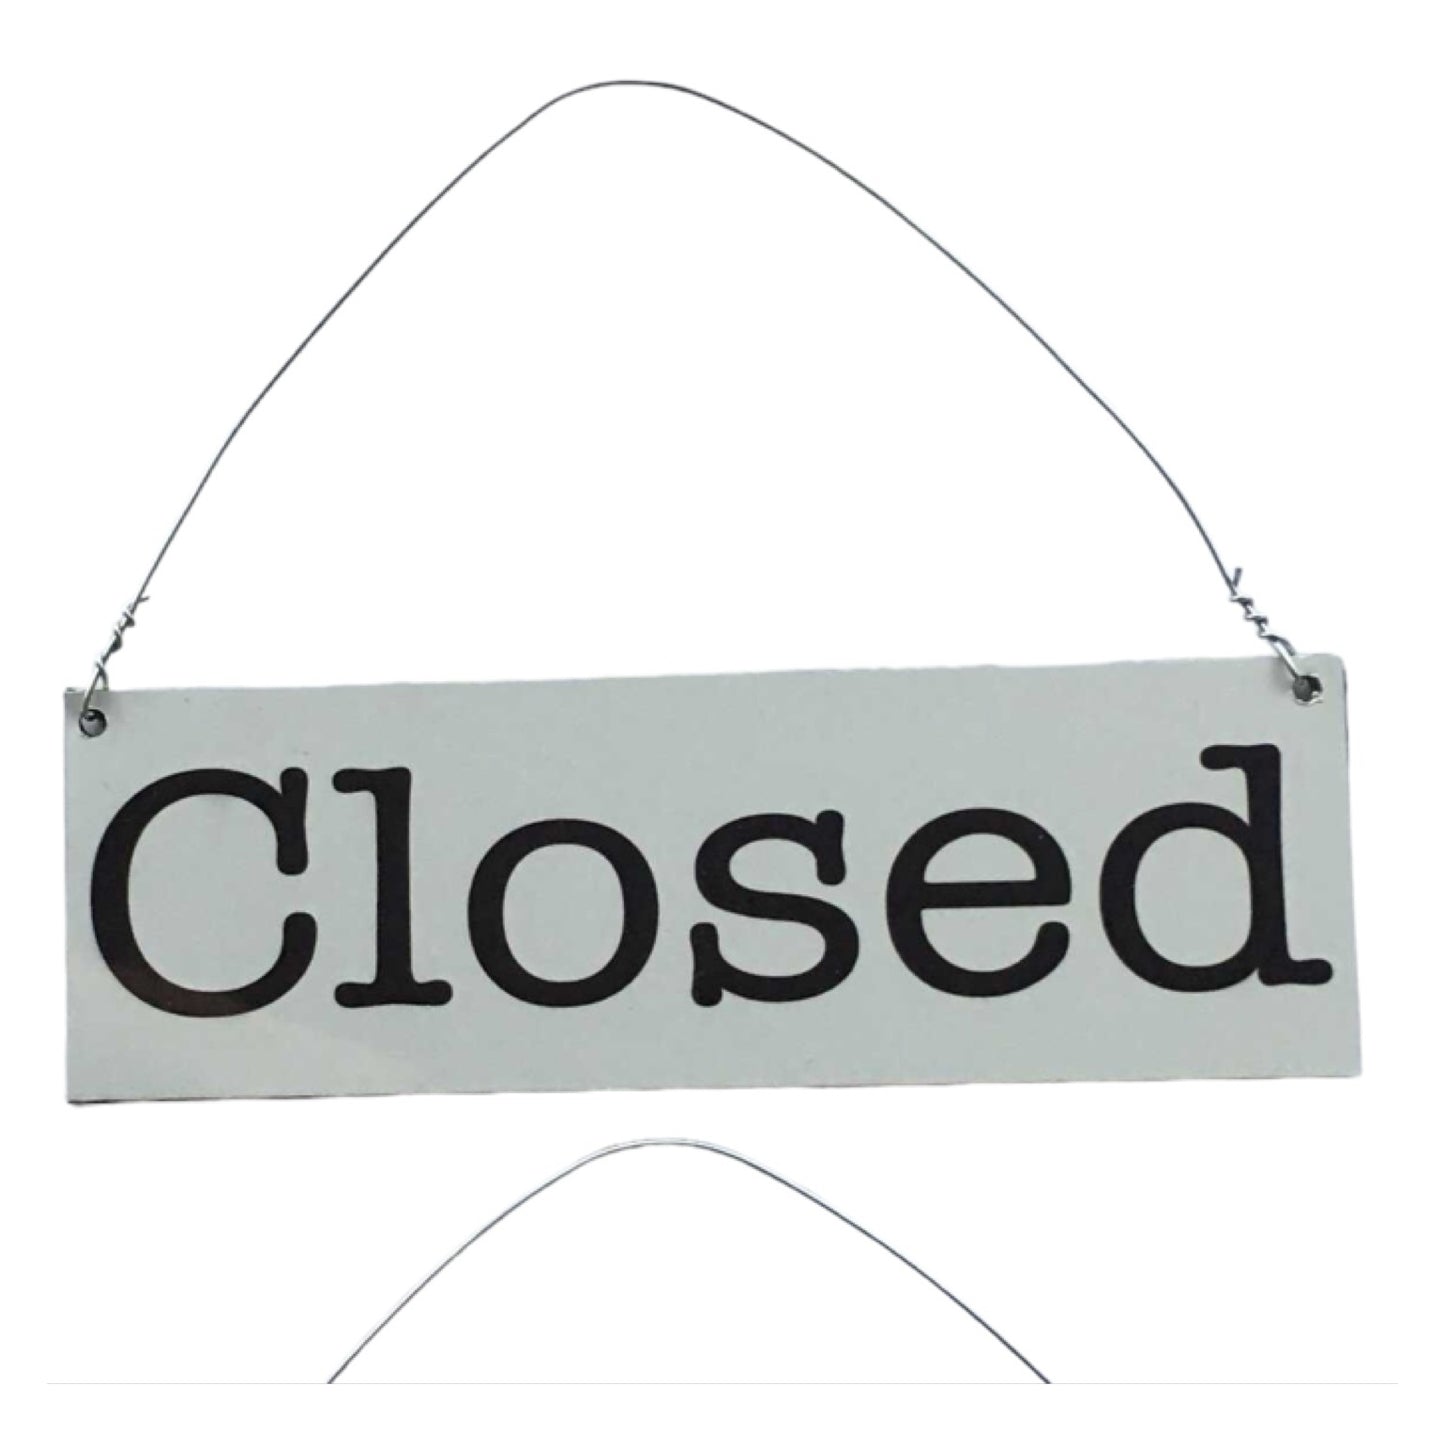 Open Closed White Business Shop Cafe Hanging Sign - The Renmy Store Homewares & Gifts 